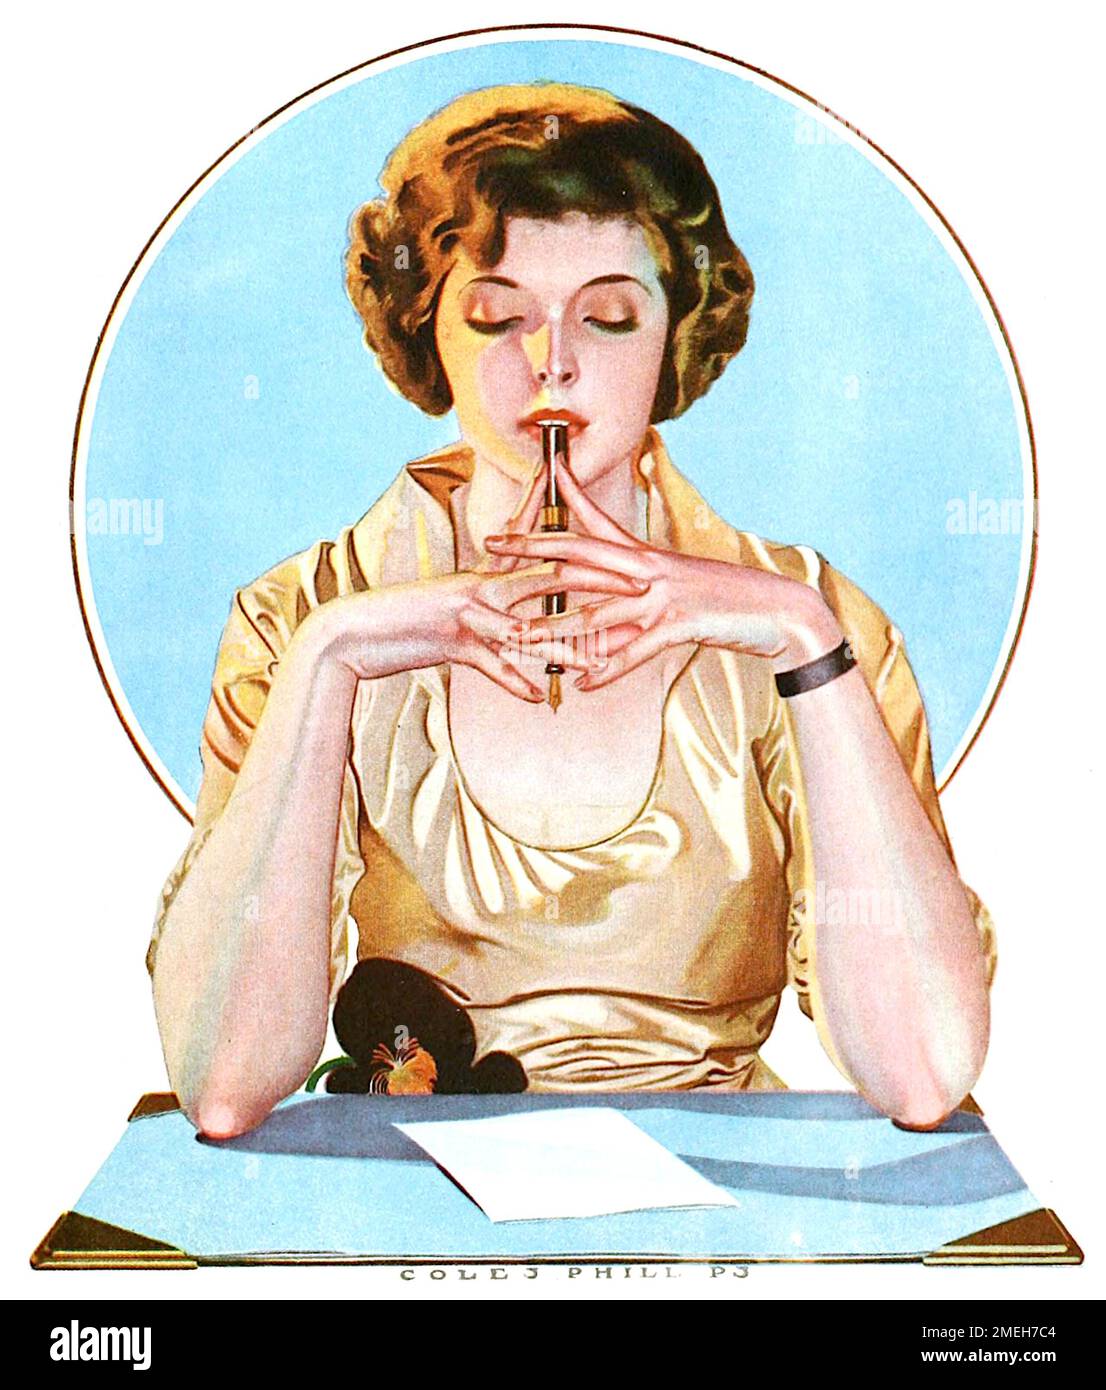 Coles Phillips - I Call it my True Companion - From an advertisement for Sheaffer fountain pens in Motion Picture Classic - 1920. Stock Photo